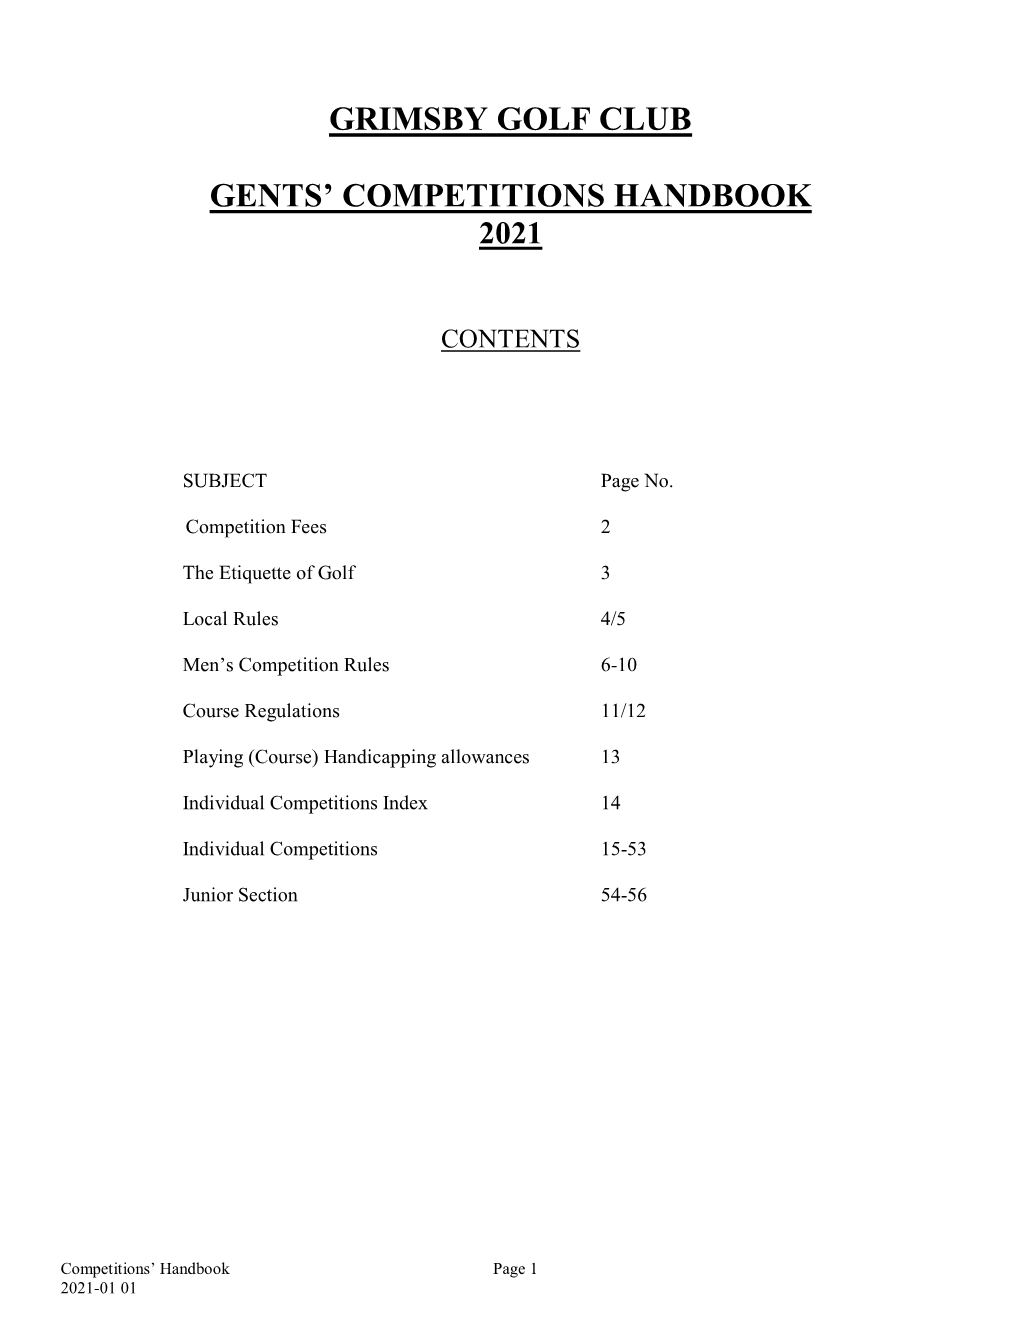 Grimsby Golf Club Gents' Competitions Handbook